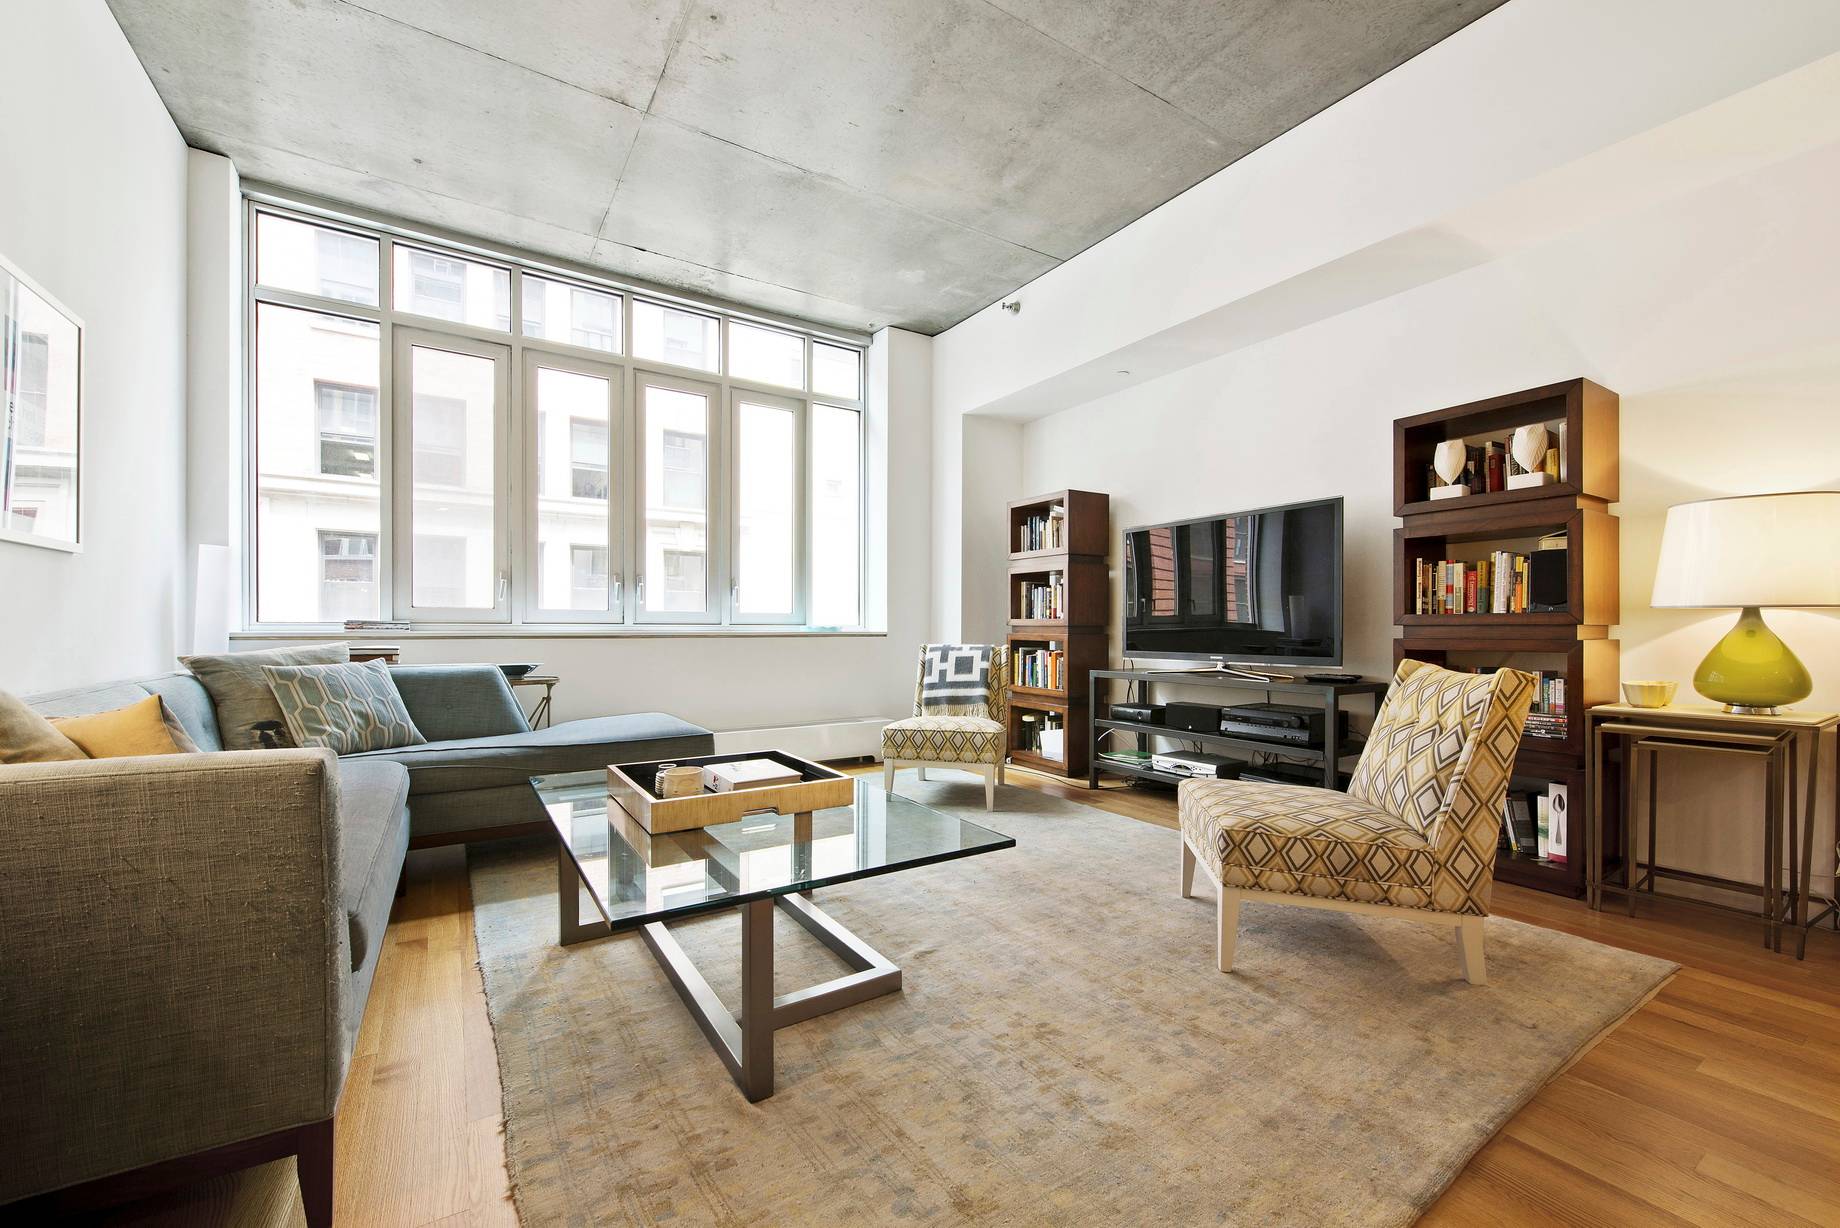 246 WEST 17TH STREET TWO BEDROOM STUNNING CONDO FOR SALE PRIME CHELSEA